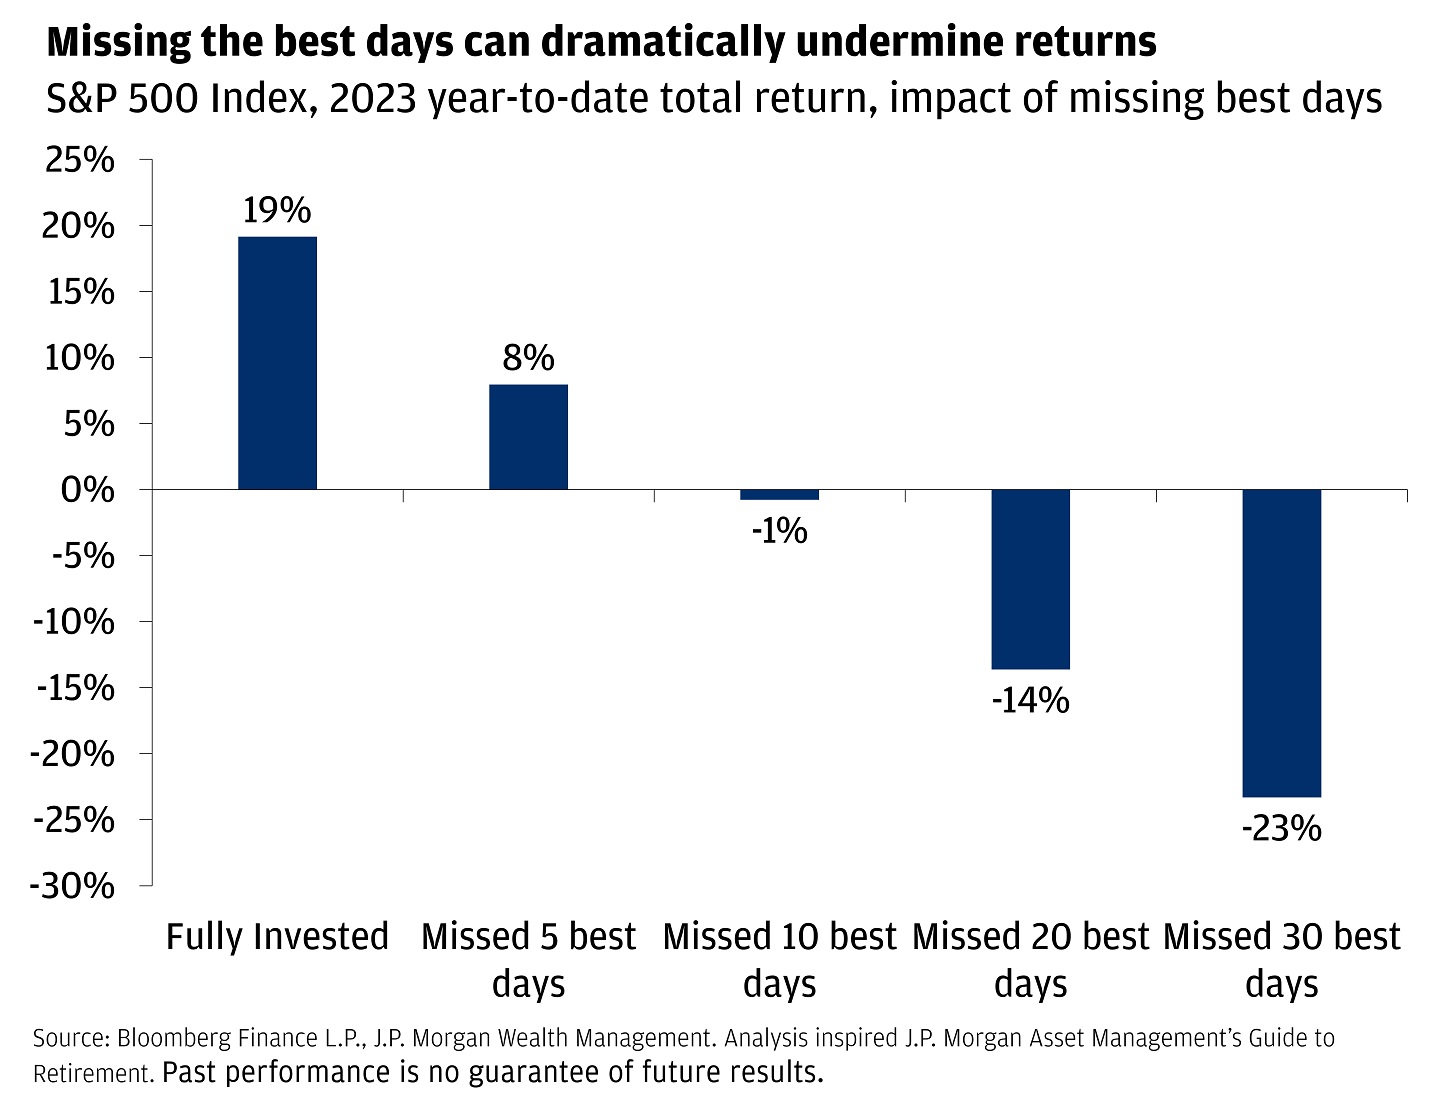 Bar chart showing the S&P500 returns during 2023 and the impact of missing the best days.